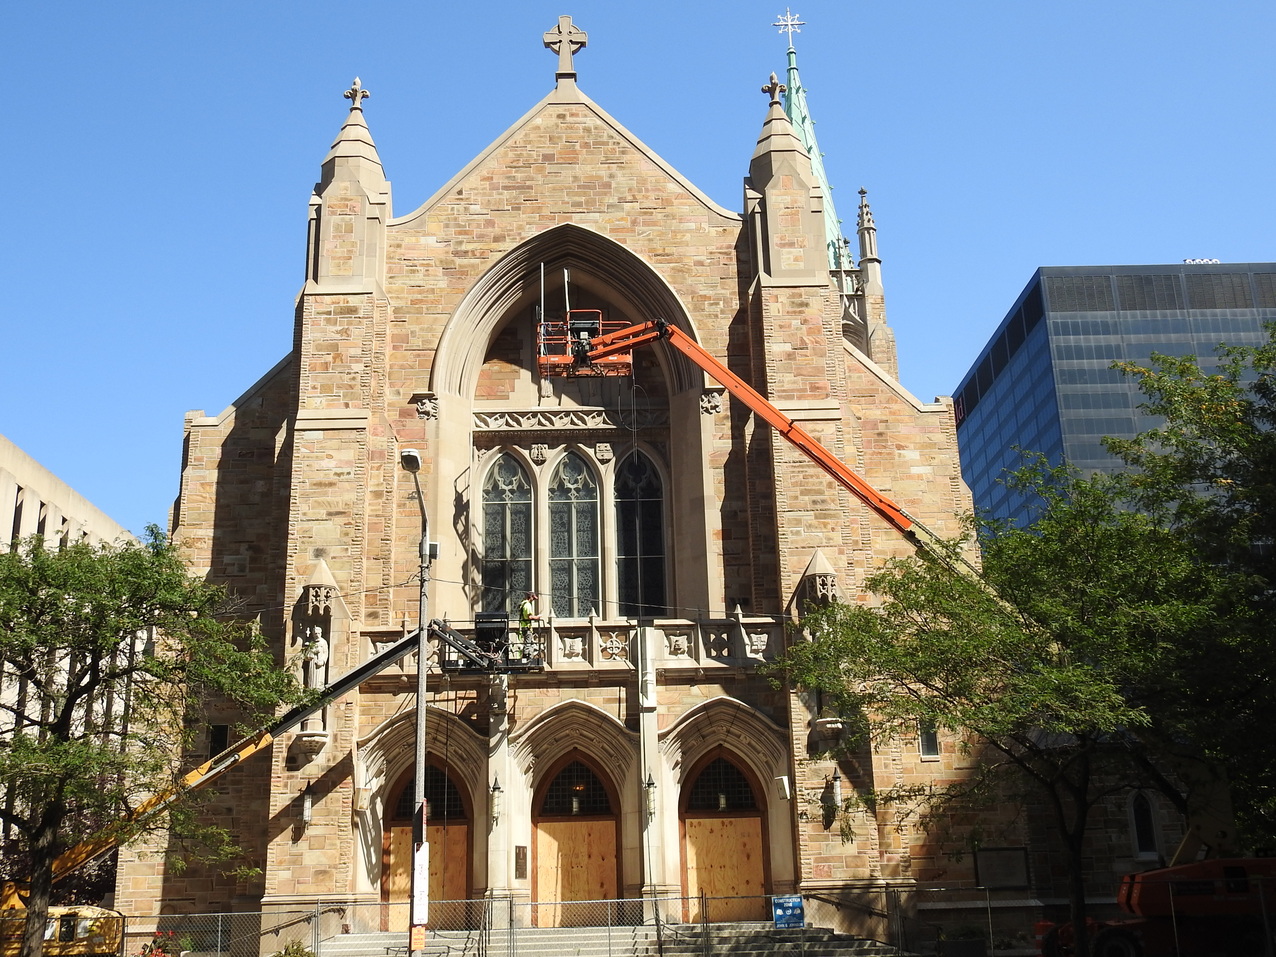 Exterior cathedral renovation project nears completion